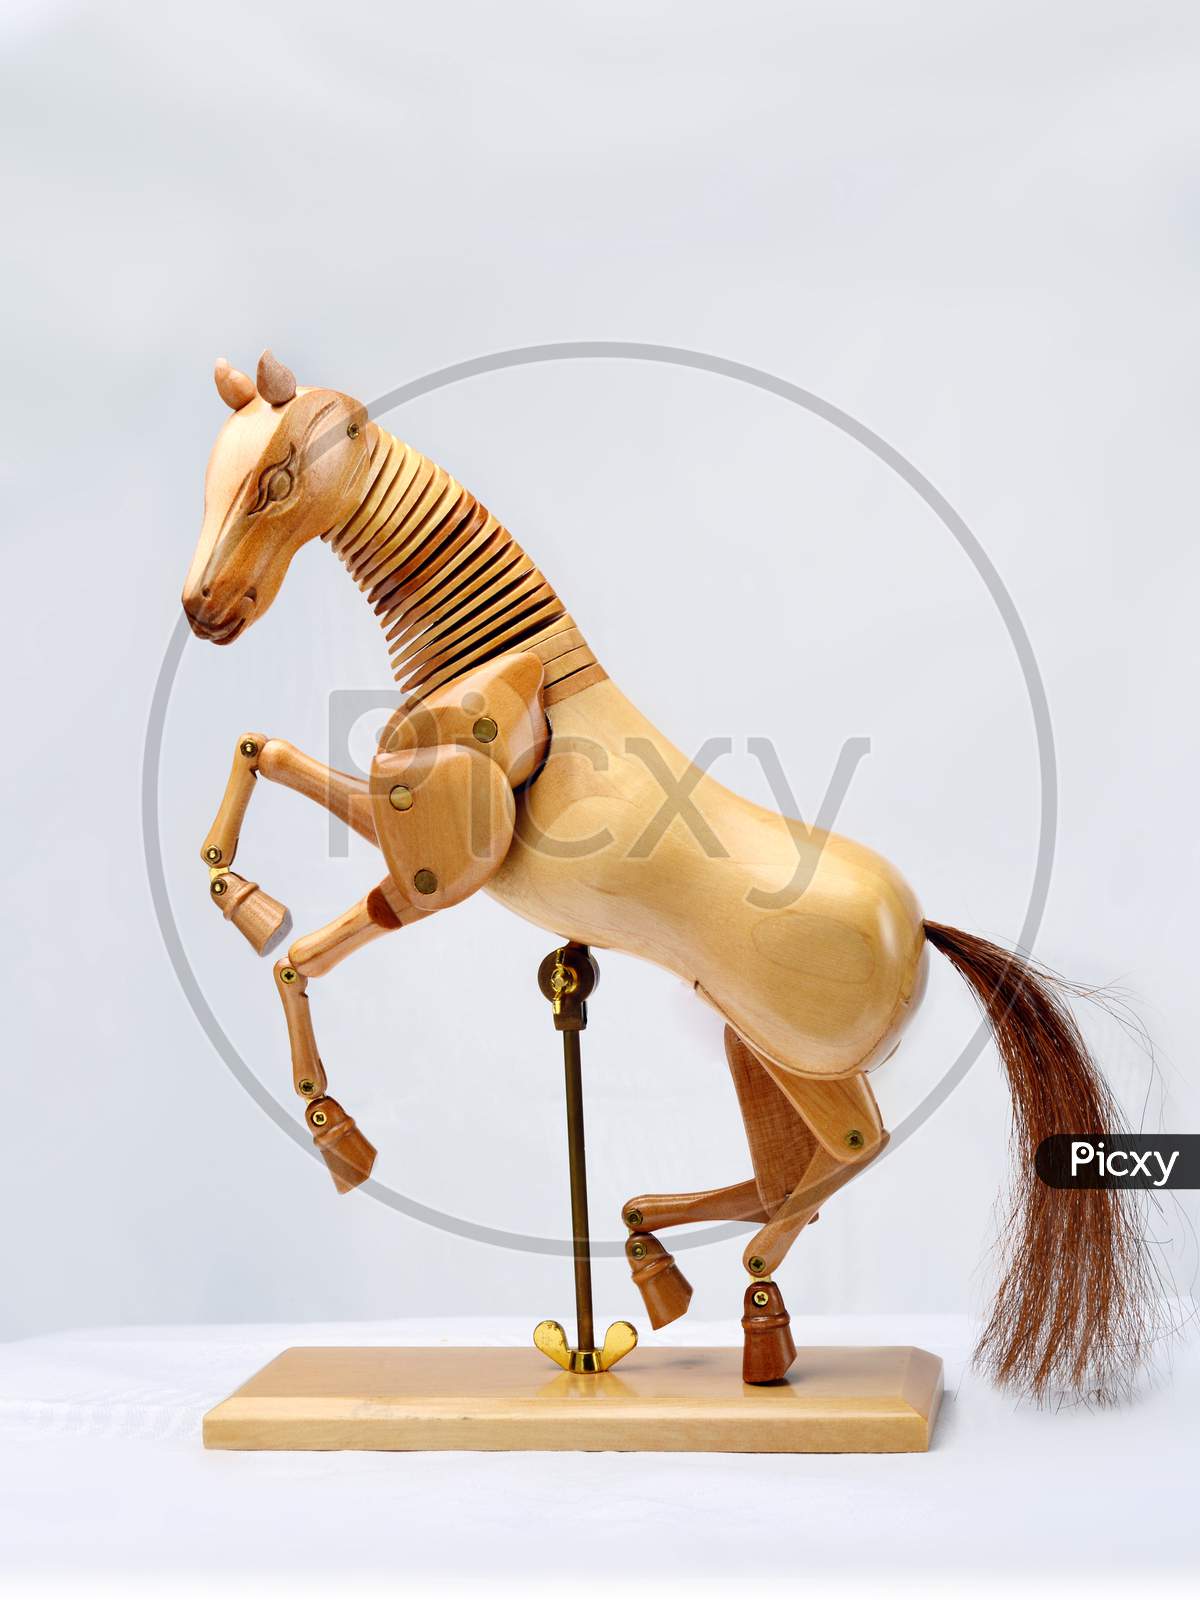 Wooden articulated horse dummy for drawing lessons